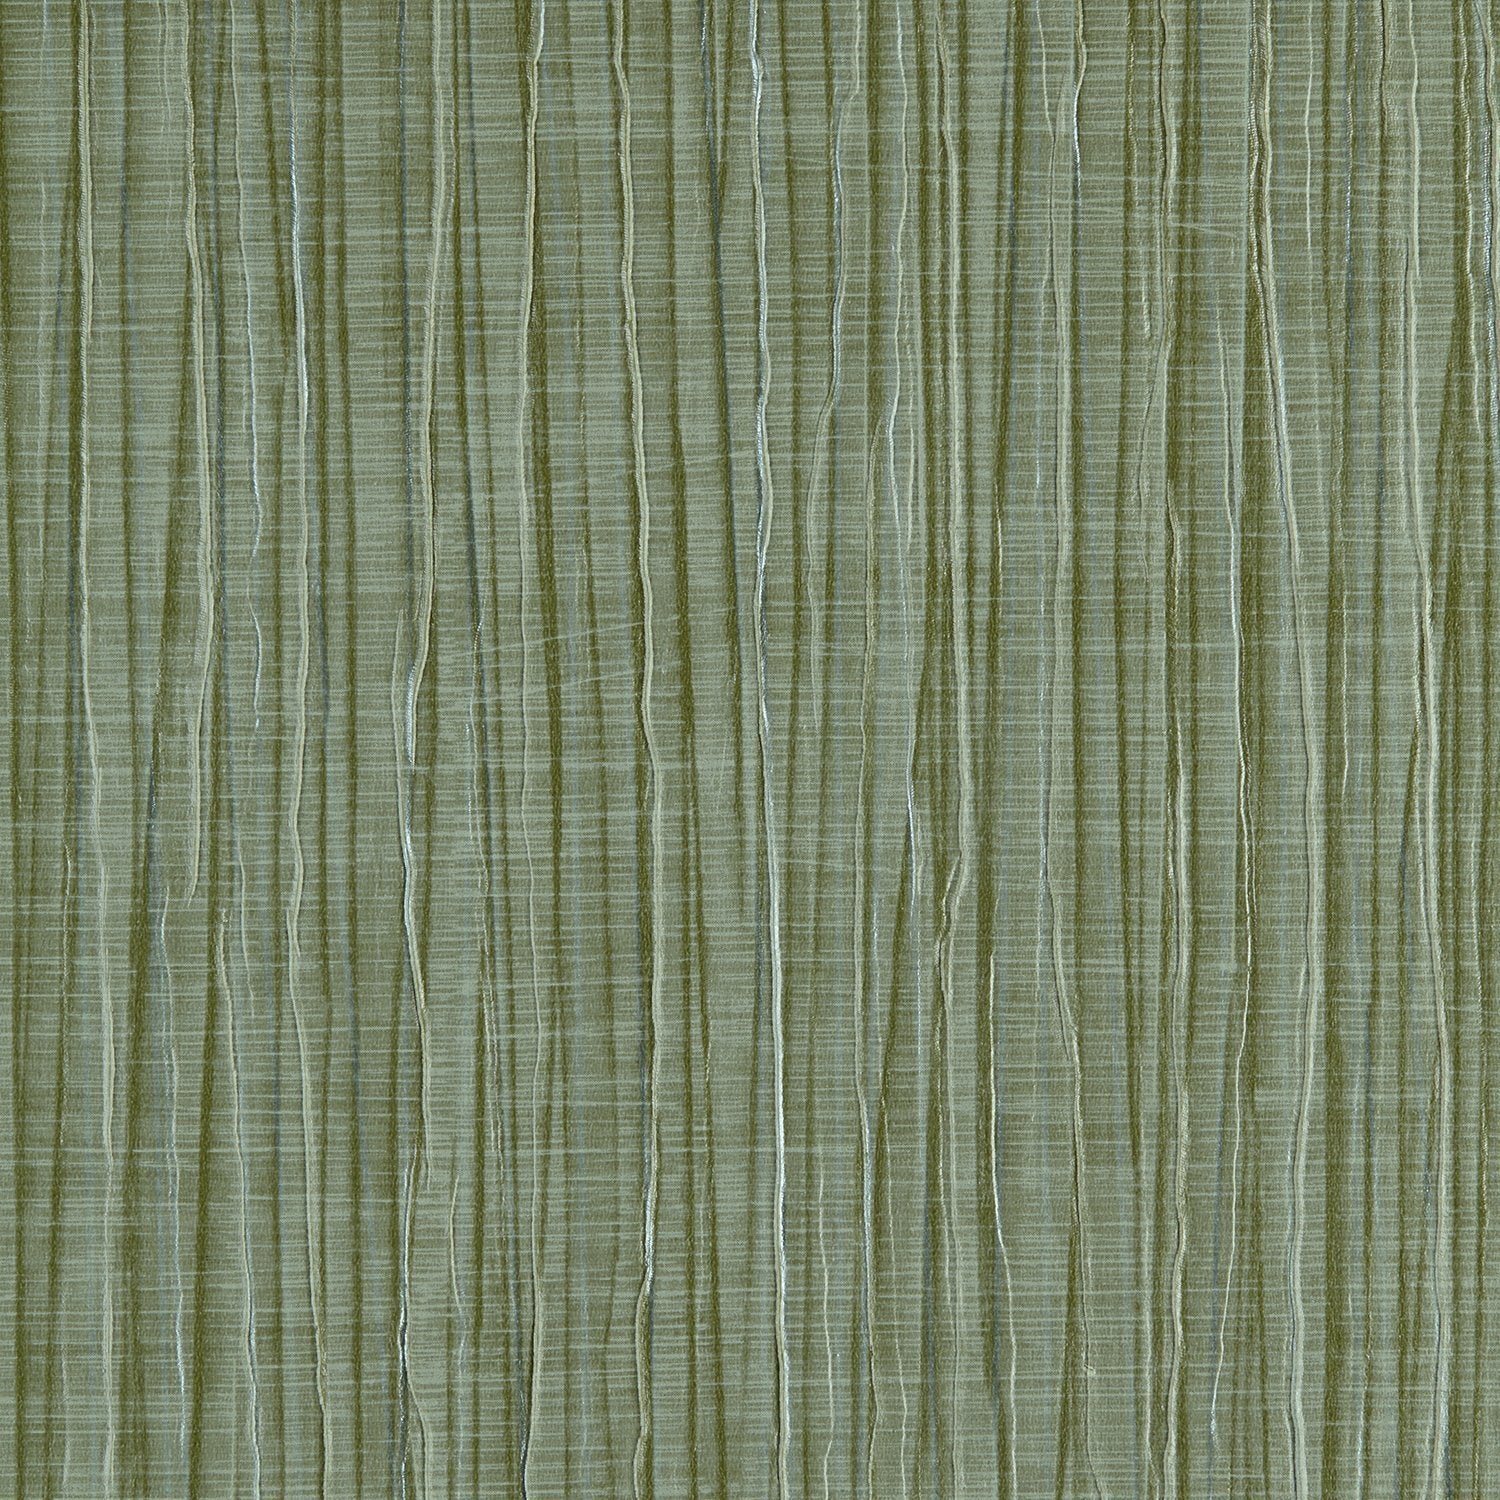 Vogue Pleat - Y47007 - Wallcovering - Vycon - Kube Contract